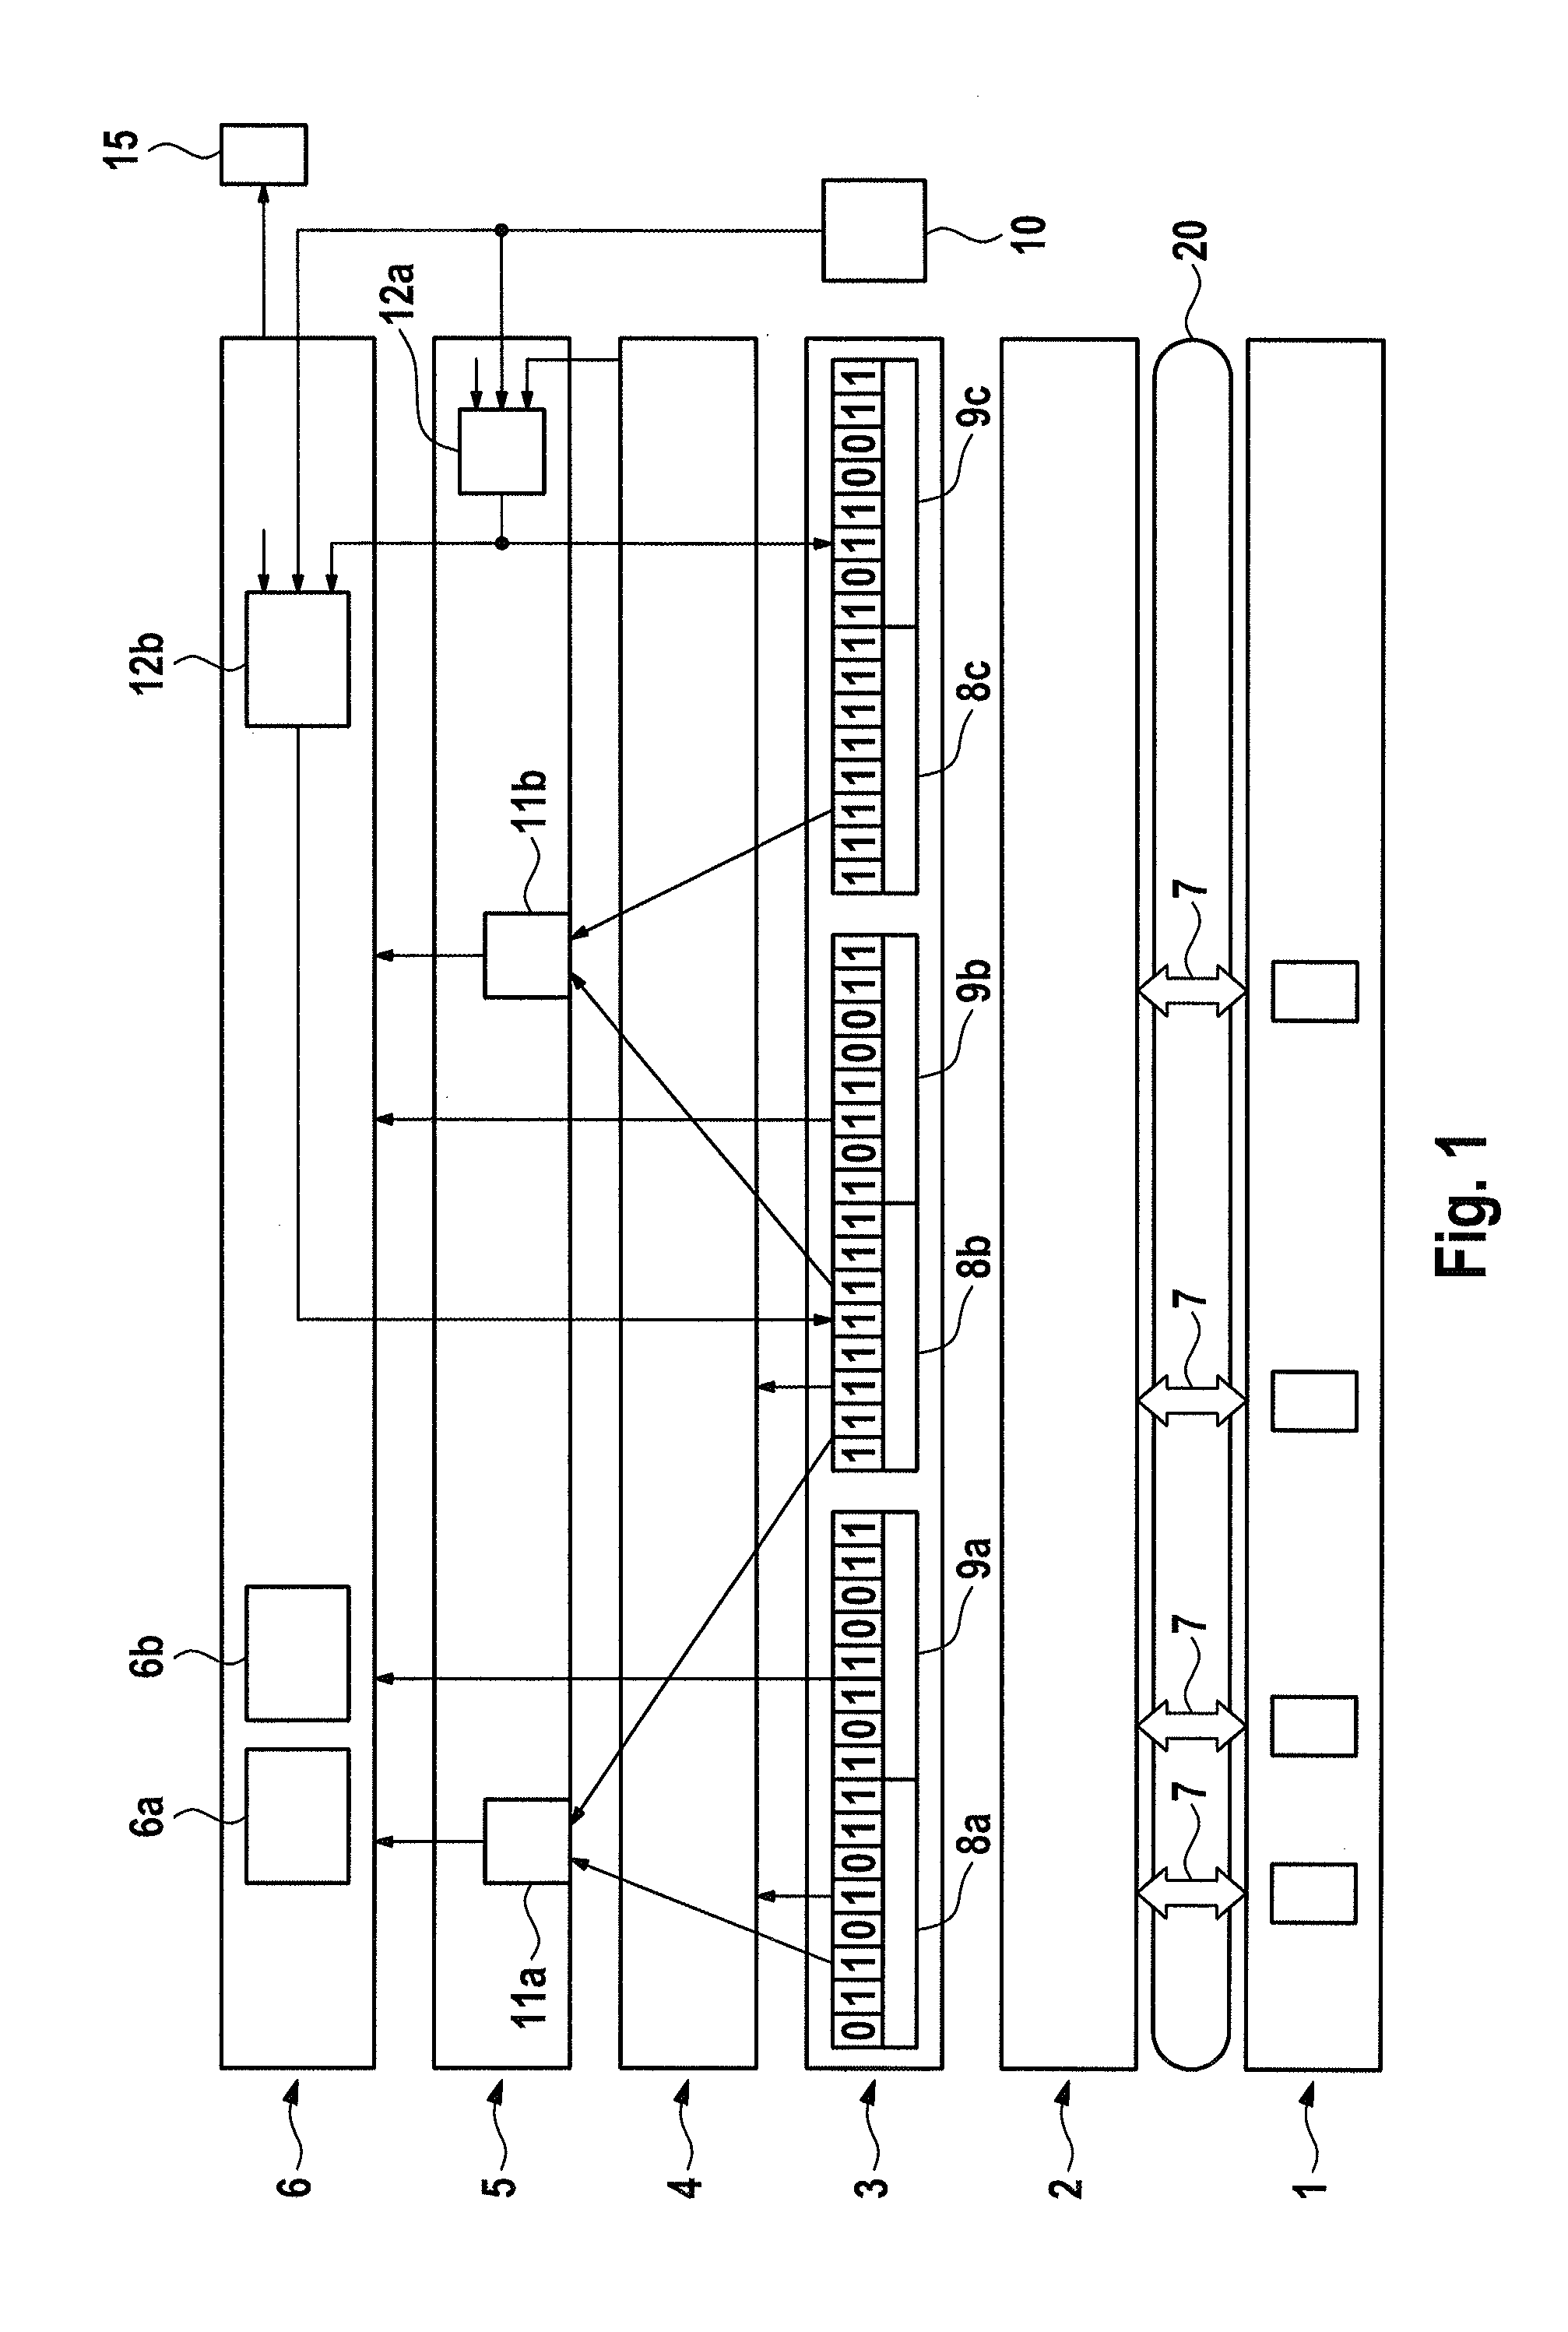 Method for improving the functional security and increasing the availabiilty of an electronic control system, and electronic control system